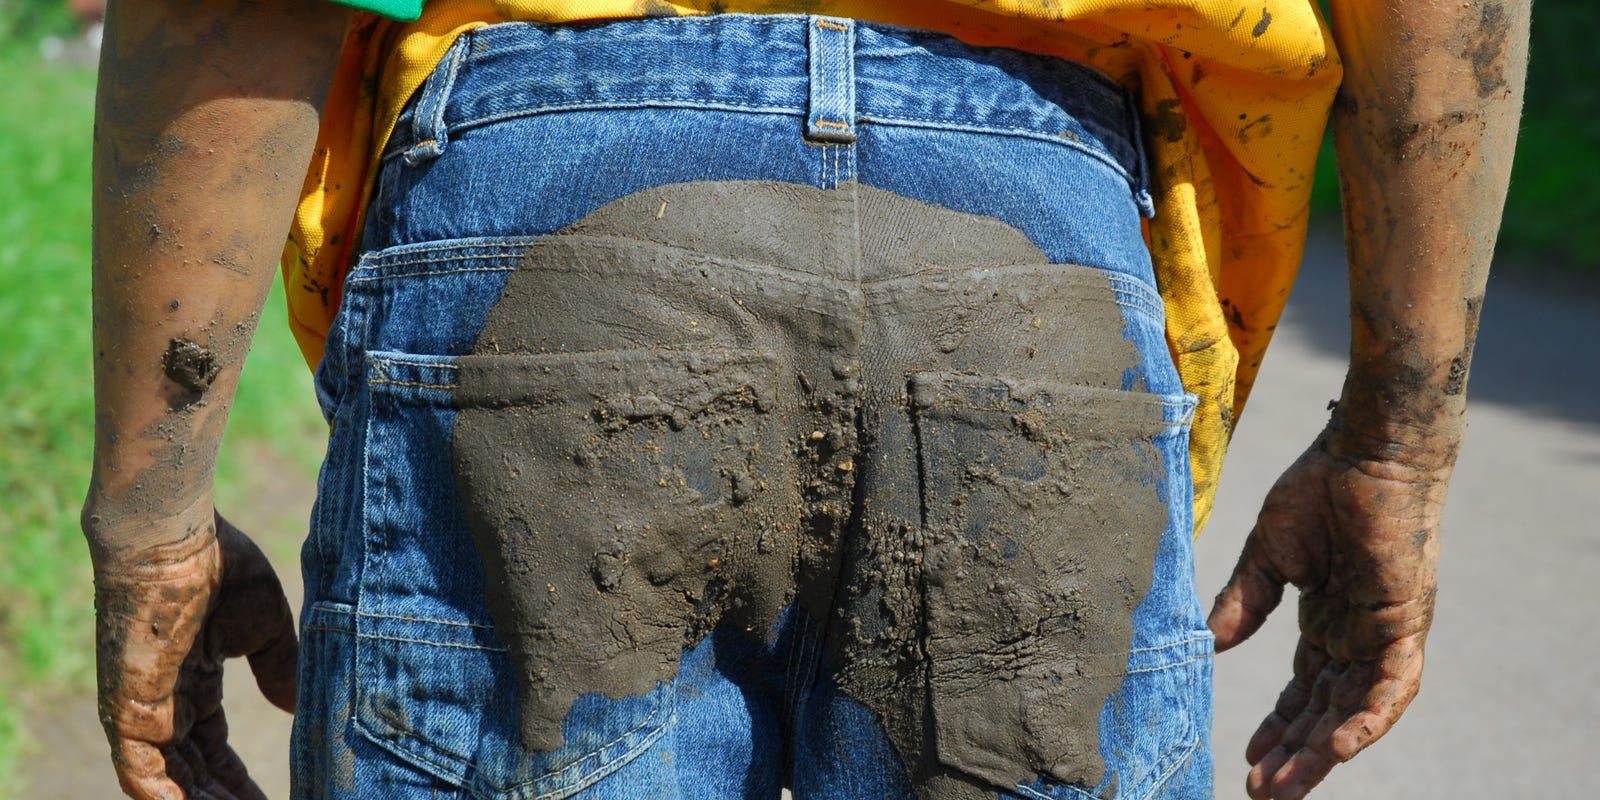 Nordstrom Is Selling 425 Jeans Covered In Fake Mud Mike Rowe Calls